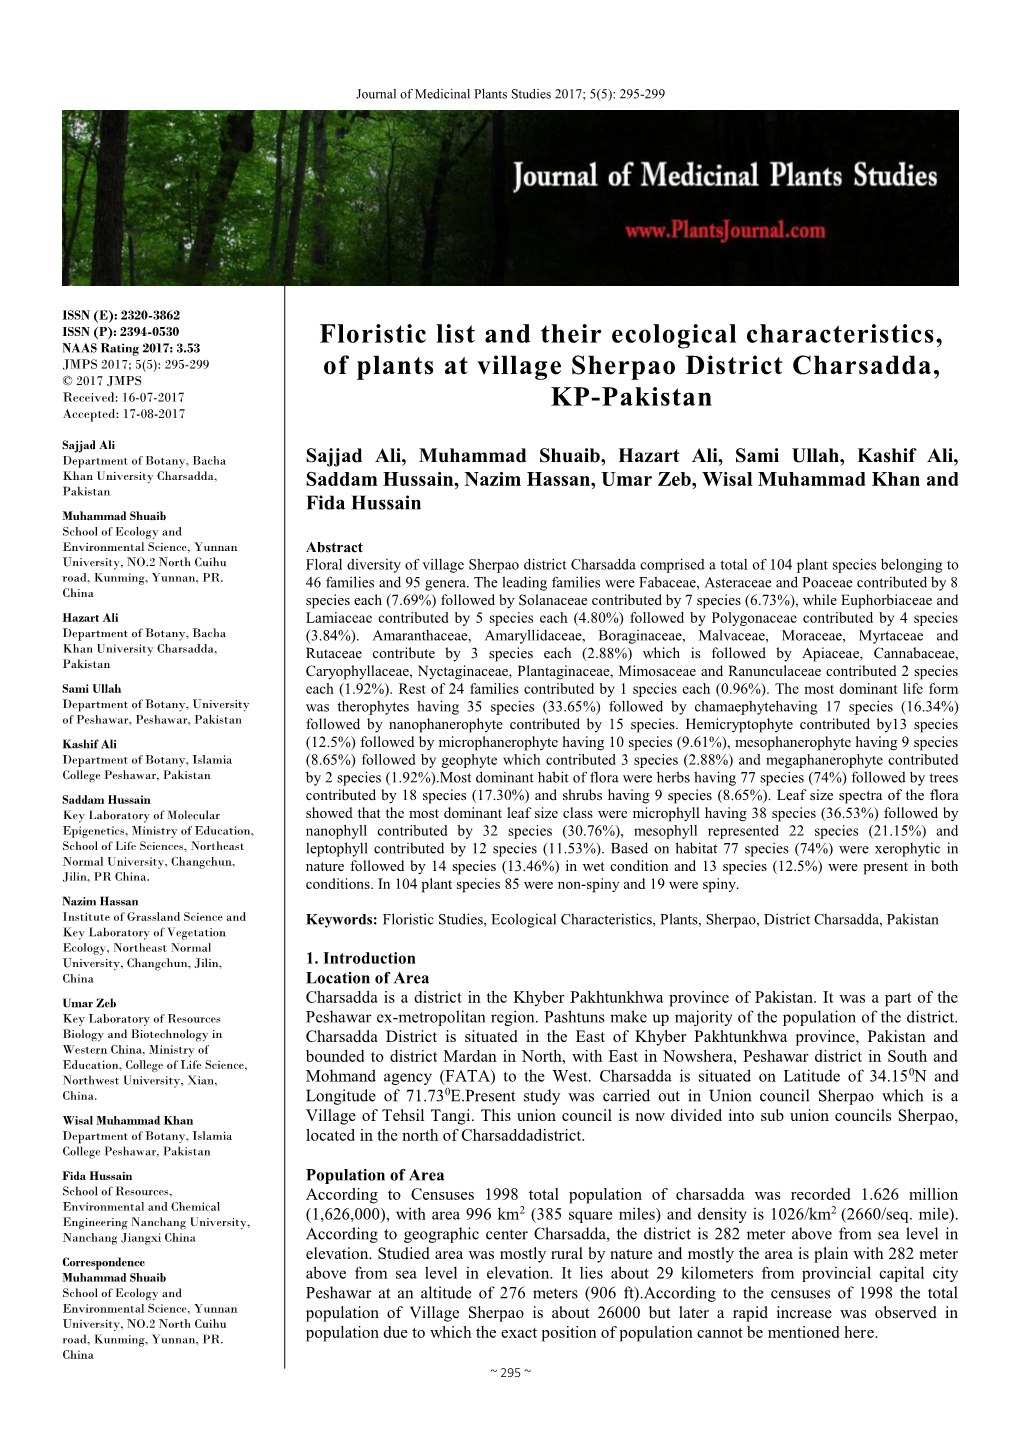 Floristic List and Their Ecological Characteristics, of Plants at Village